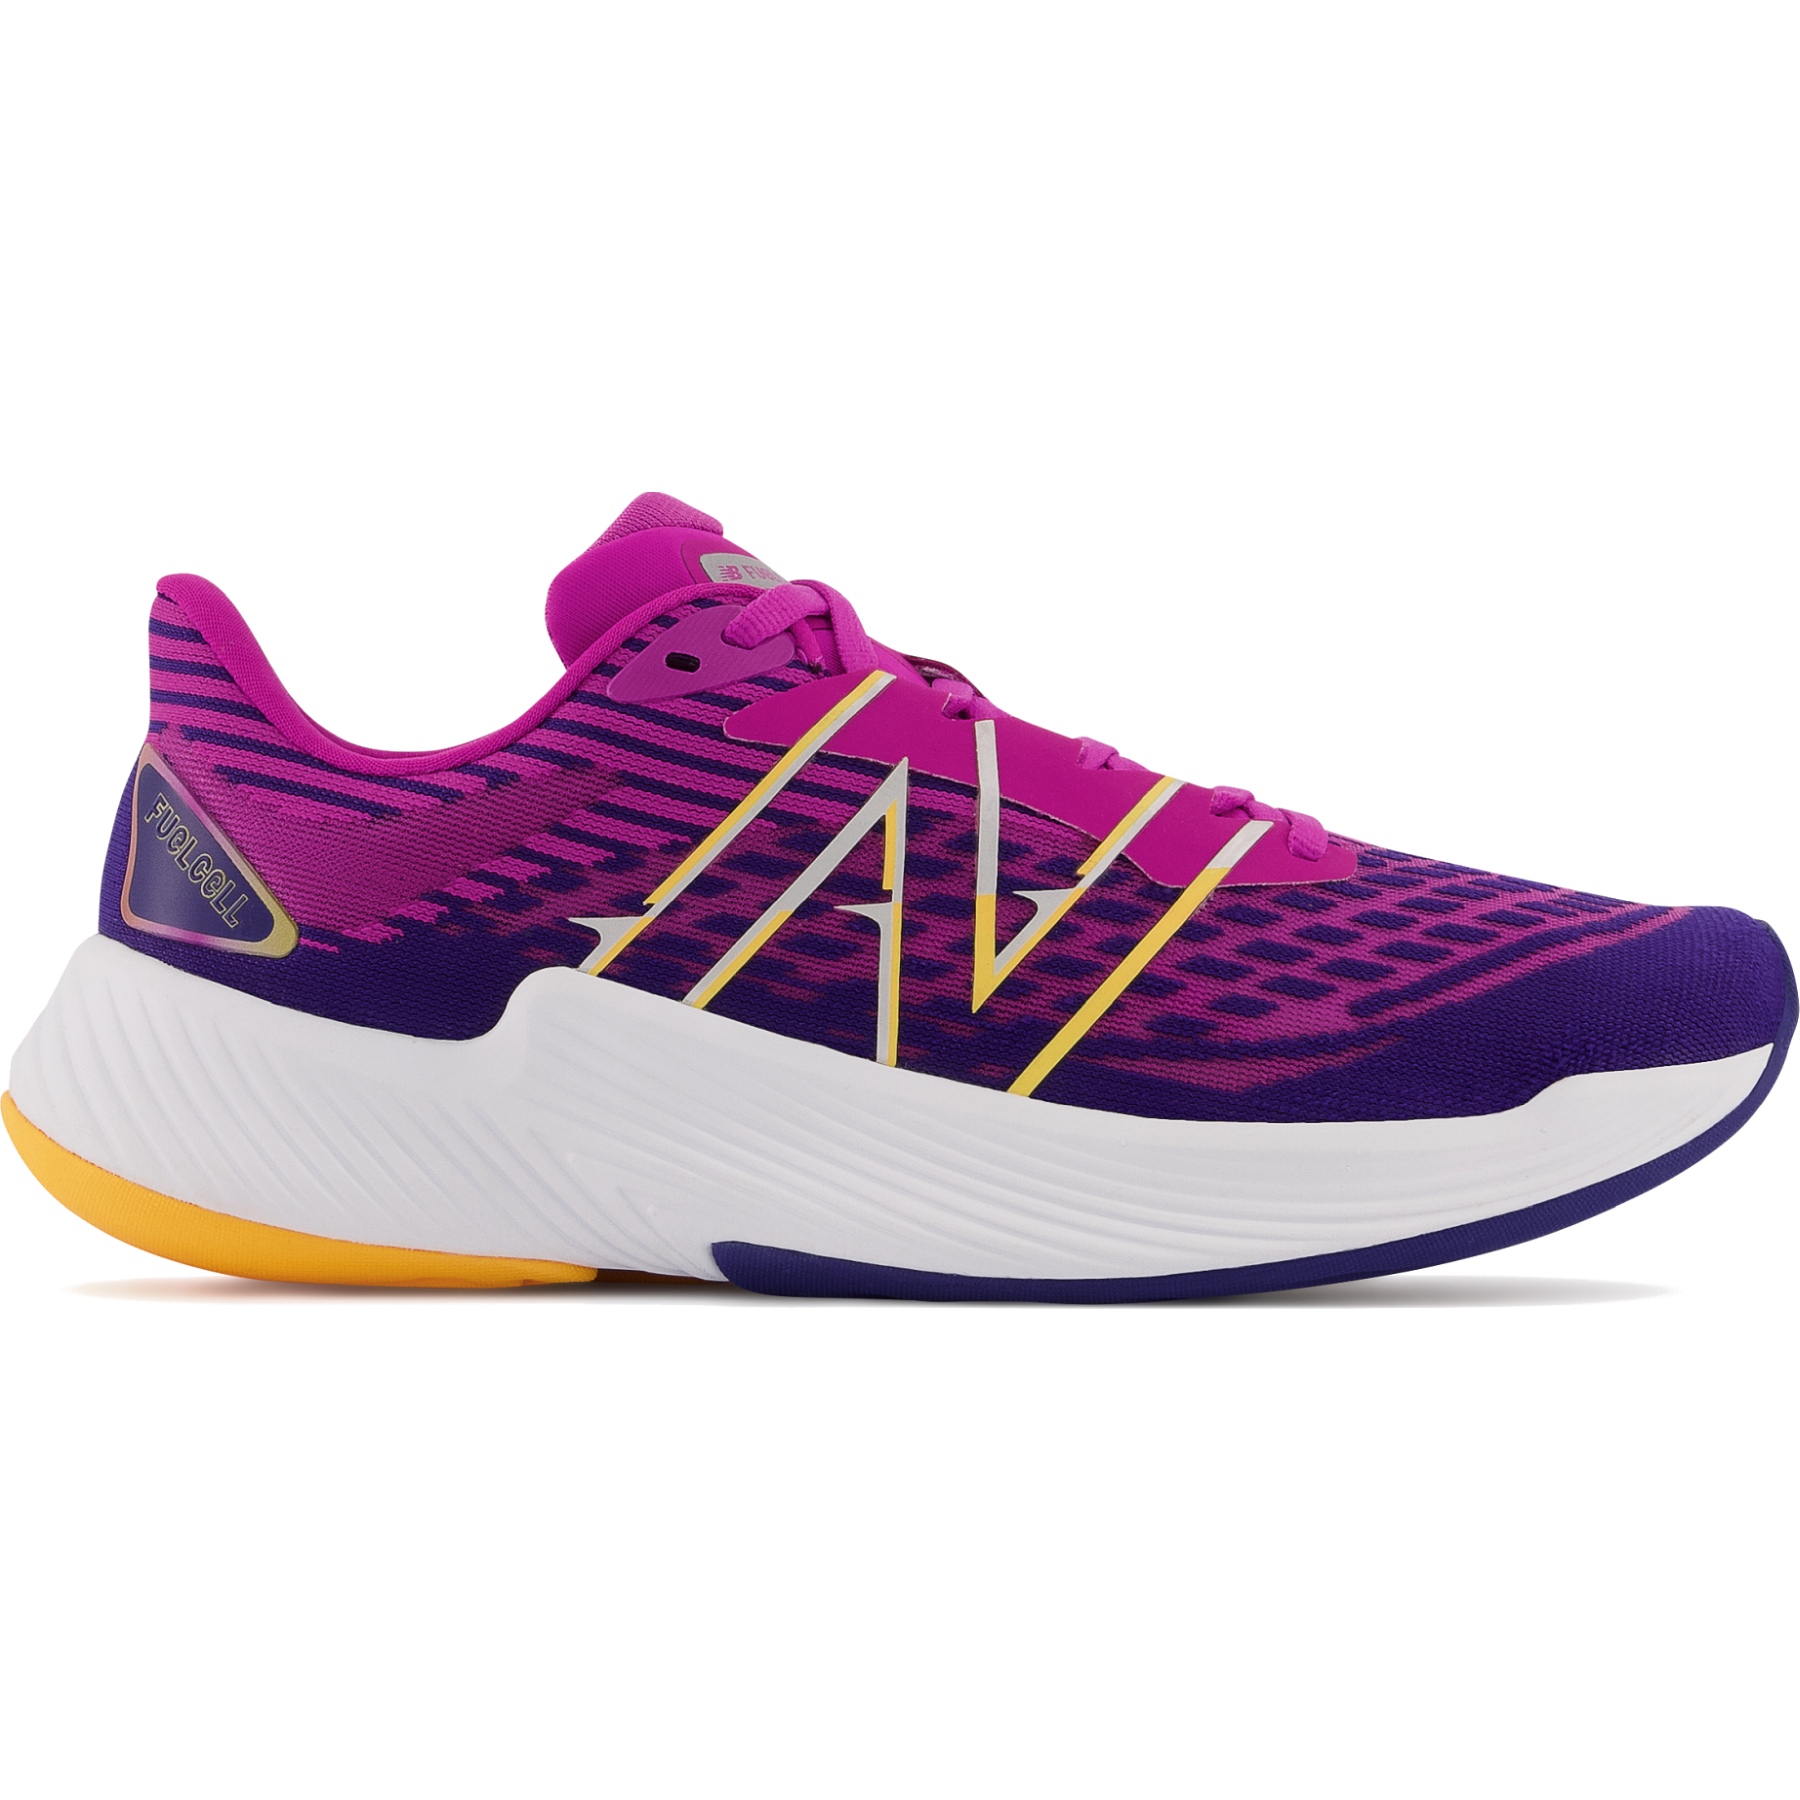 Immagine di New Balance FuelCell Prism v2 Womens Running Shoes - Navy